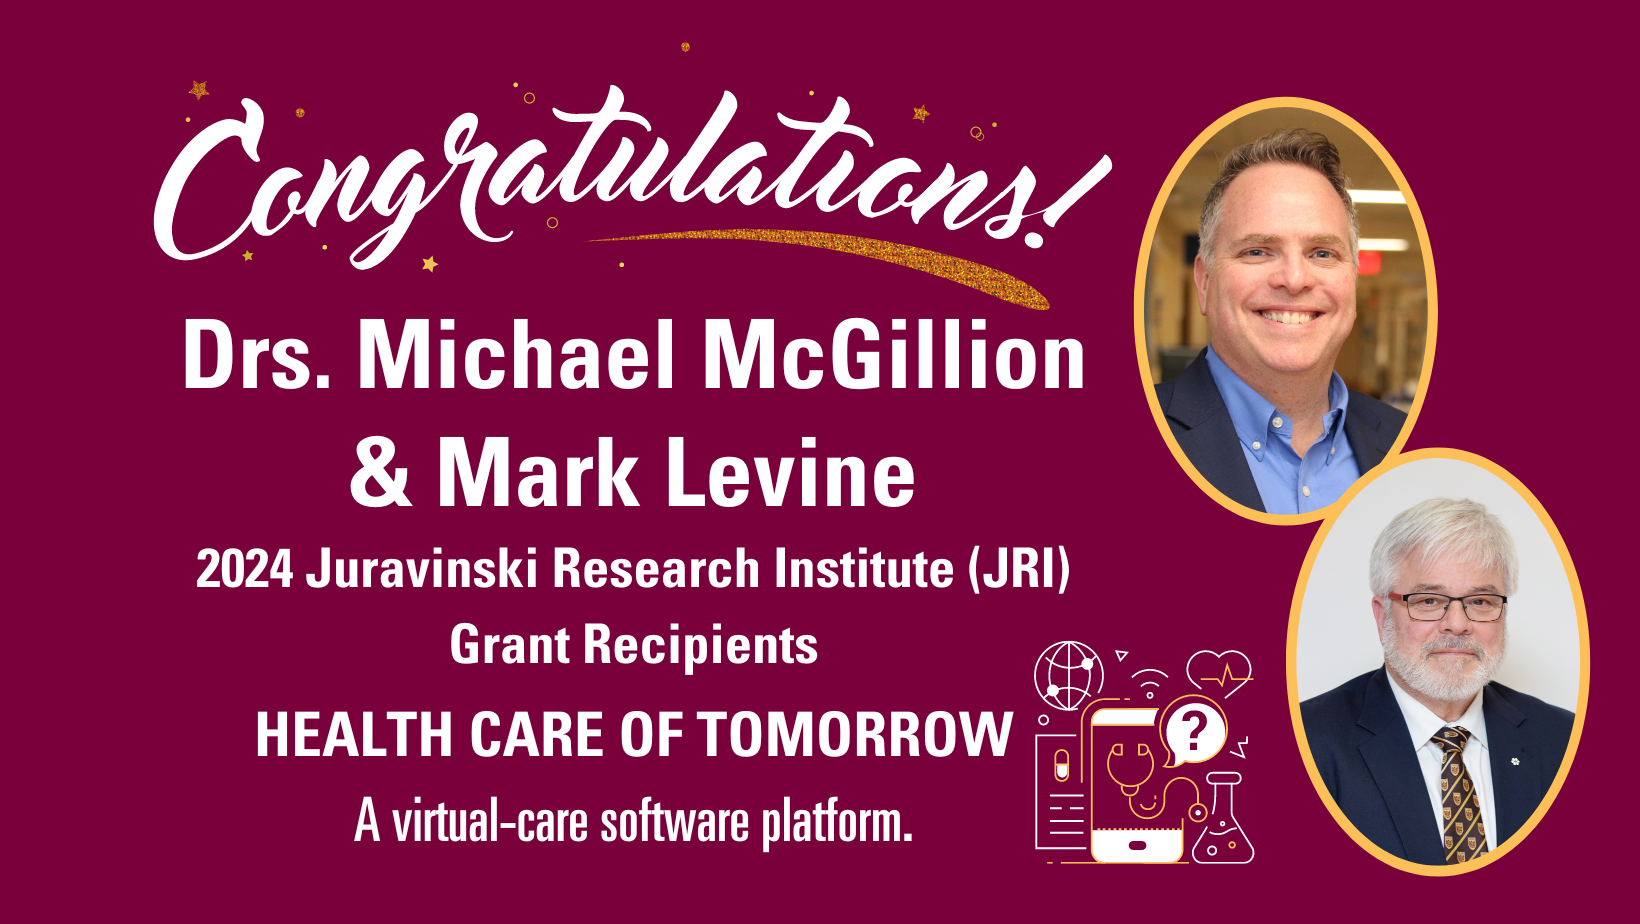 news card image (funding announcement) Title: Drs. McGillion & Levine secure $1.9M in funding from JRI